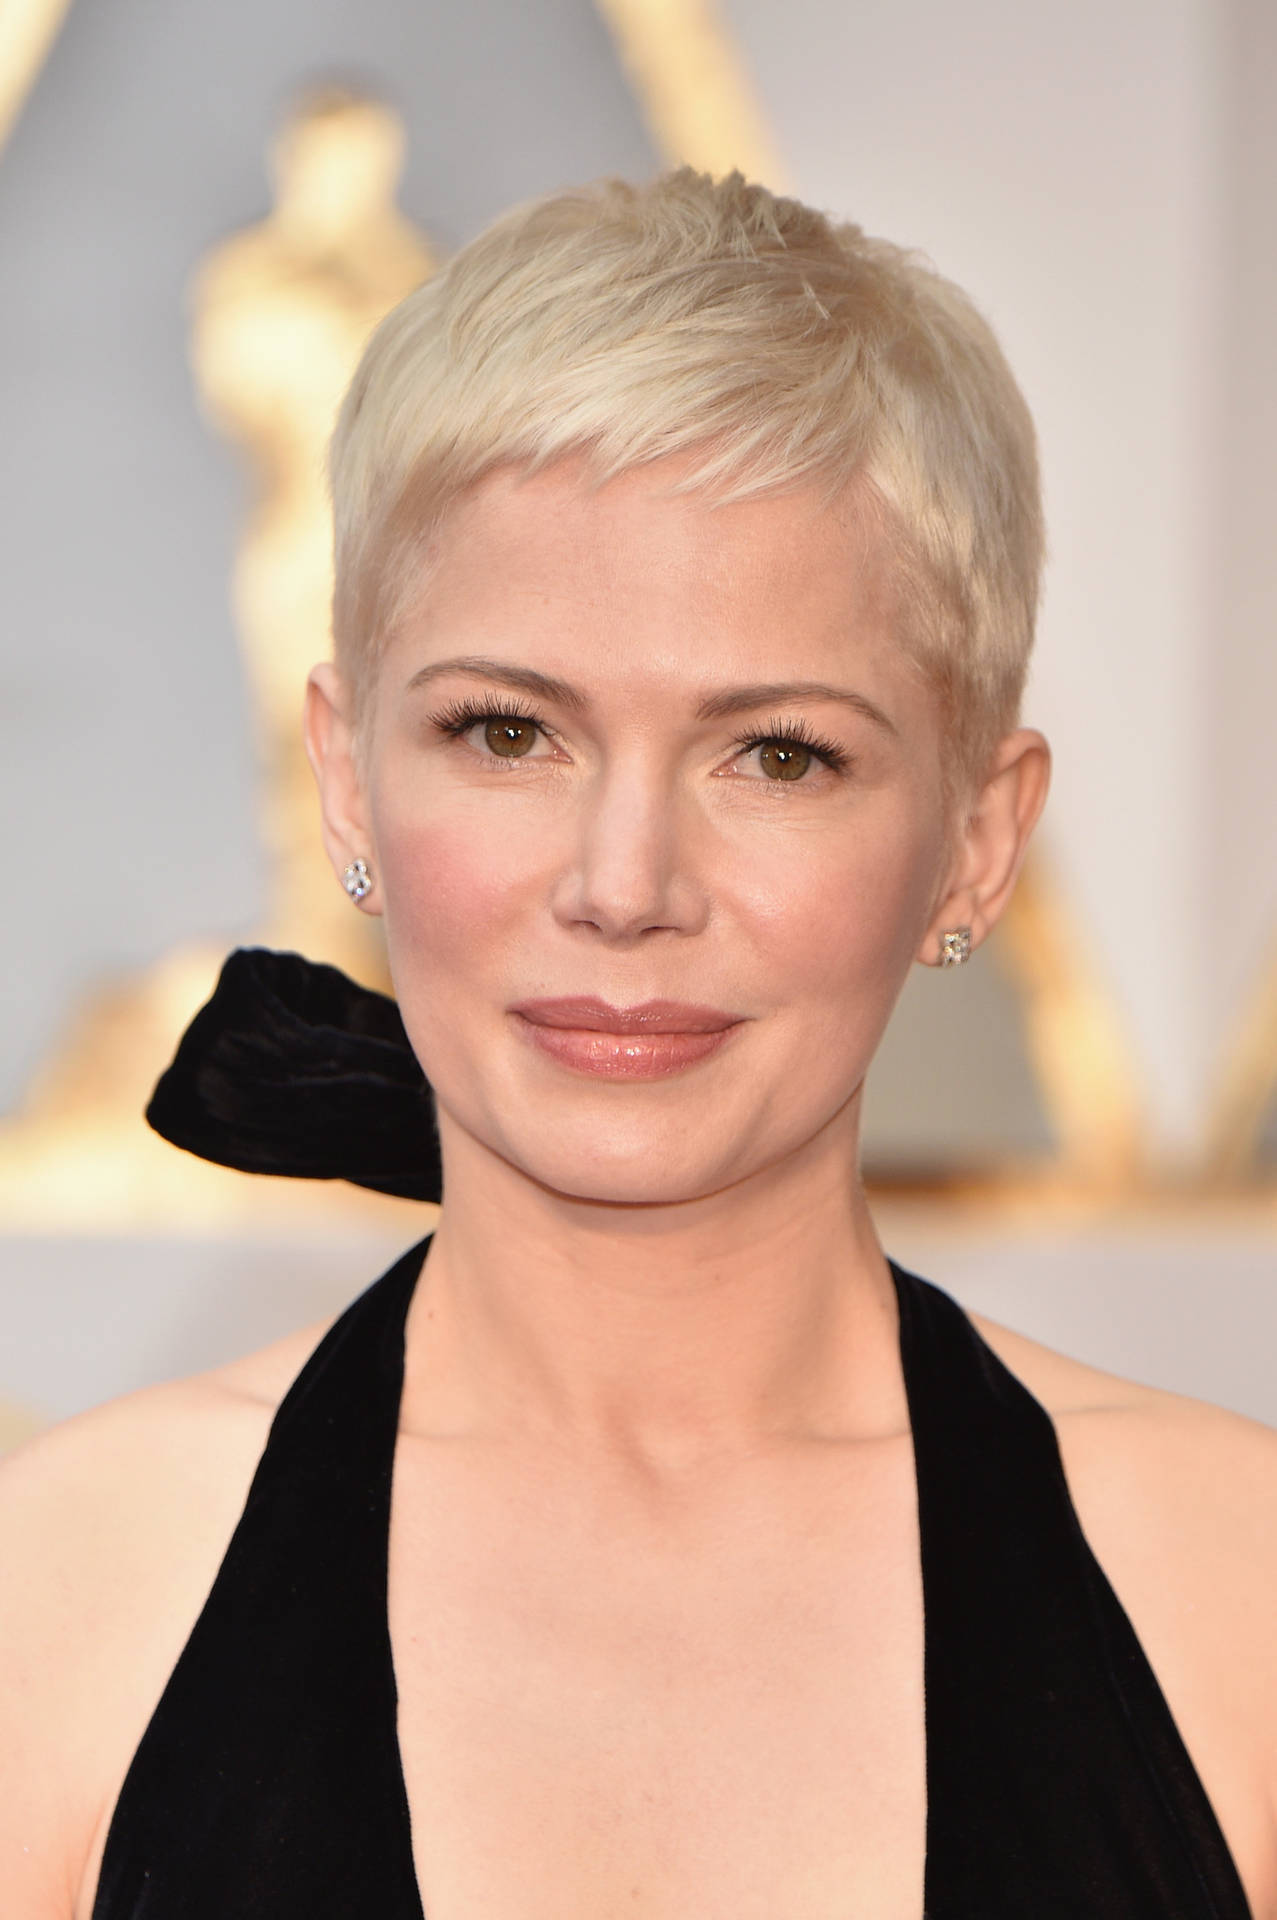 Glamorous close-up capture of Michelle Williams at the 2017 Oscars. Wallpaper